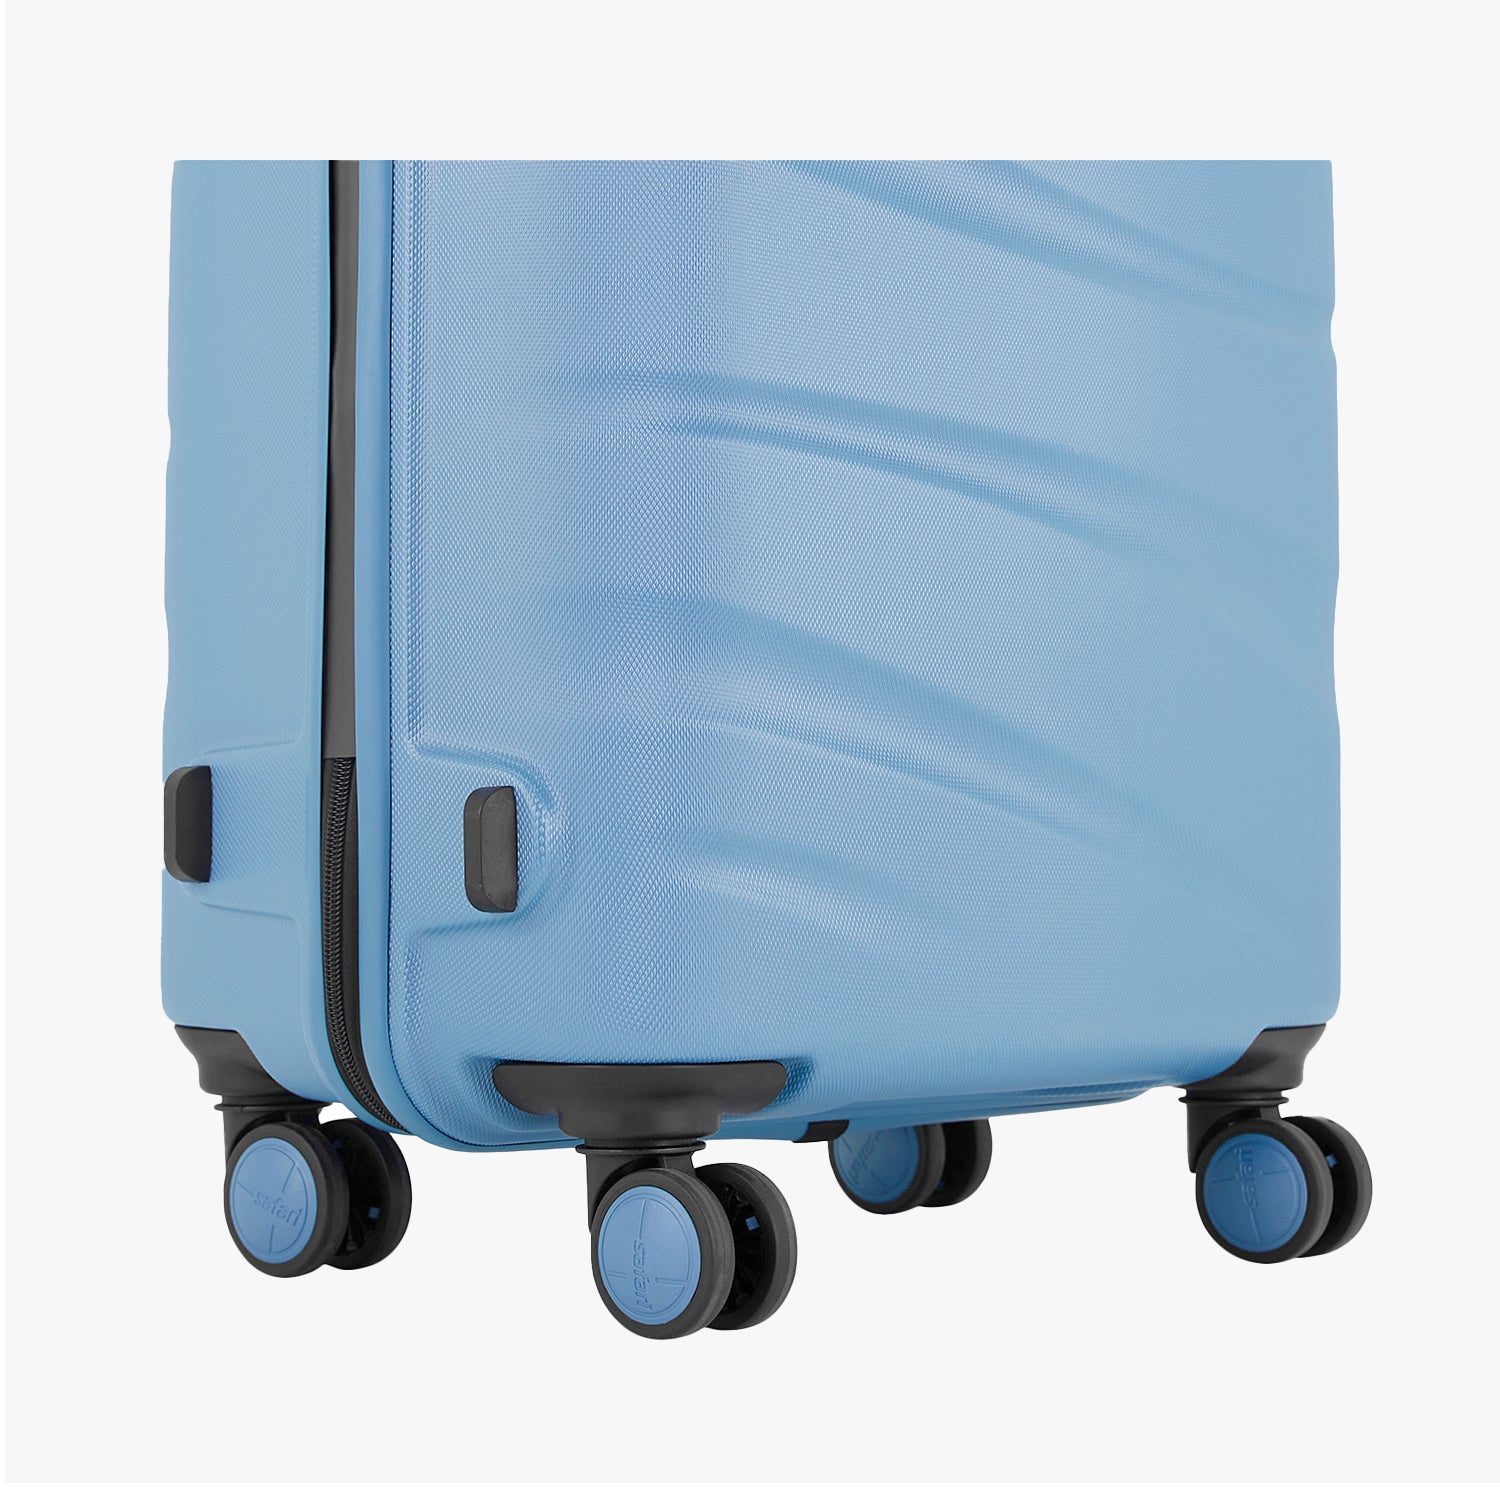 Persia Hard Luggage with Dual Wheels Combo (Small and Medium)- Pearl Blue